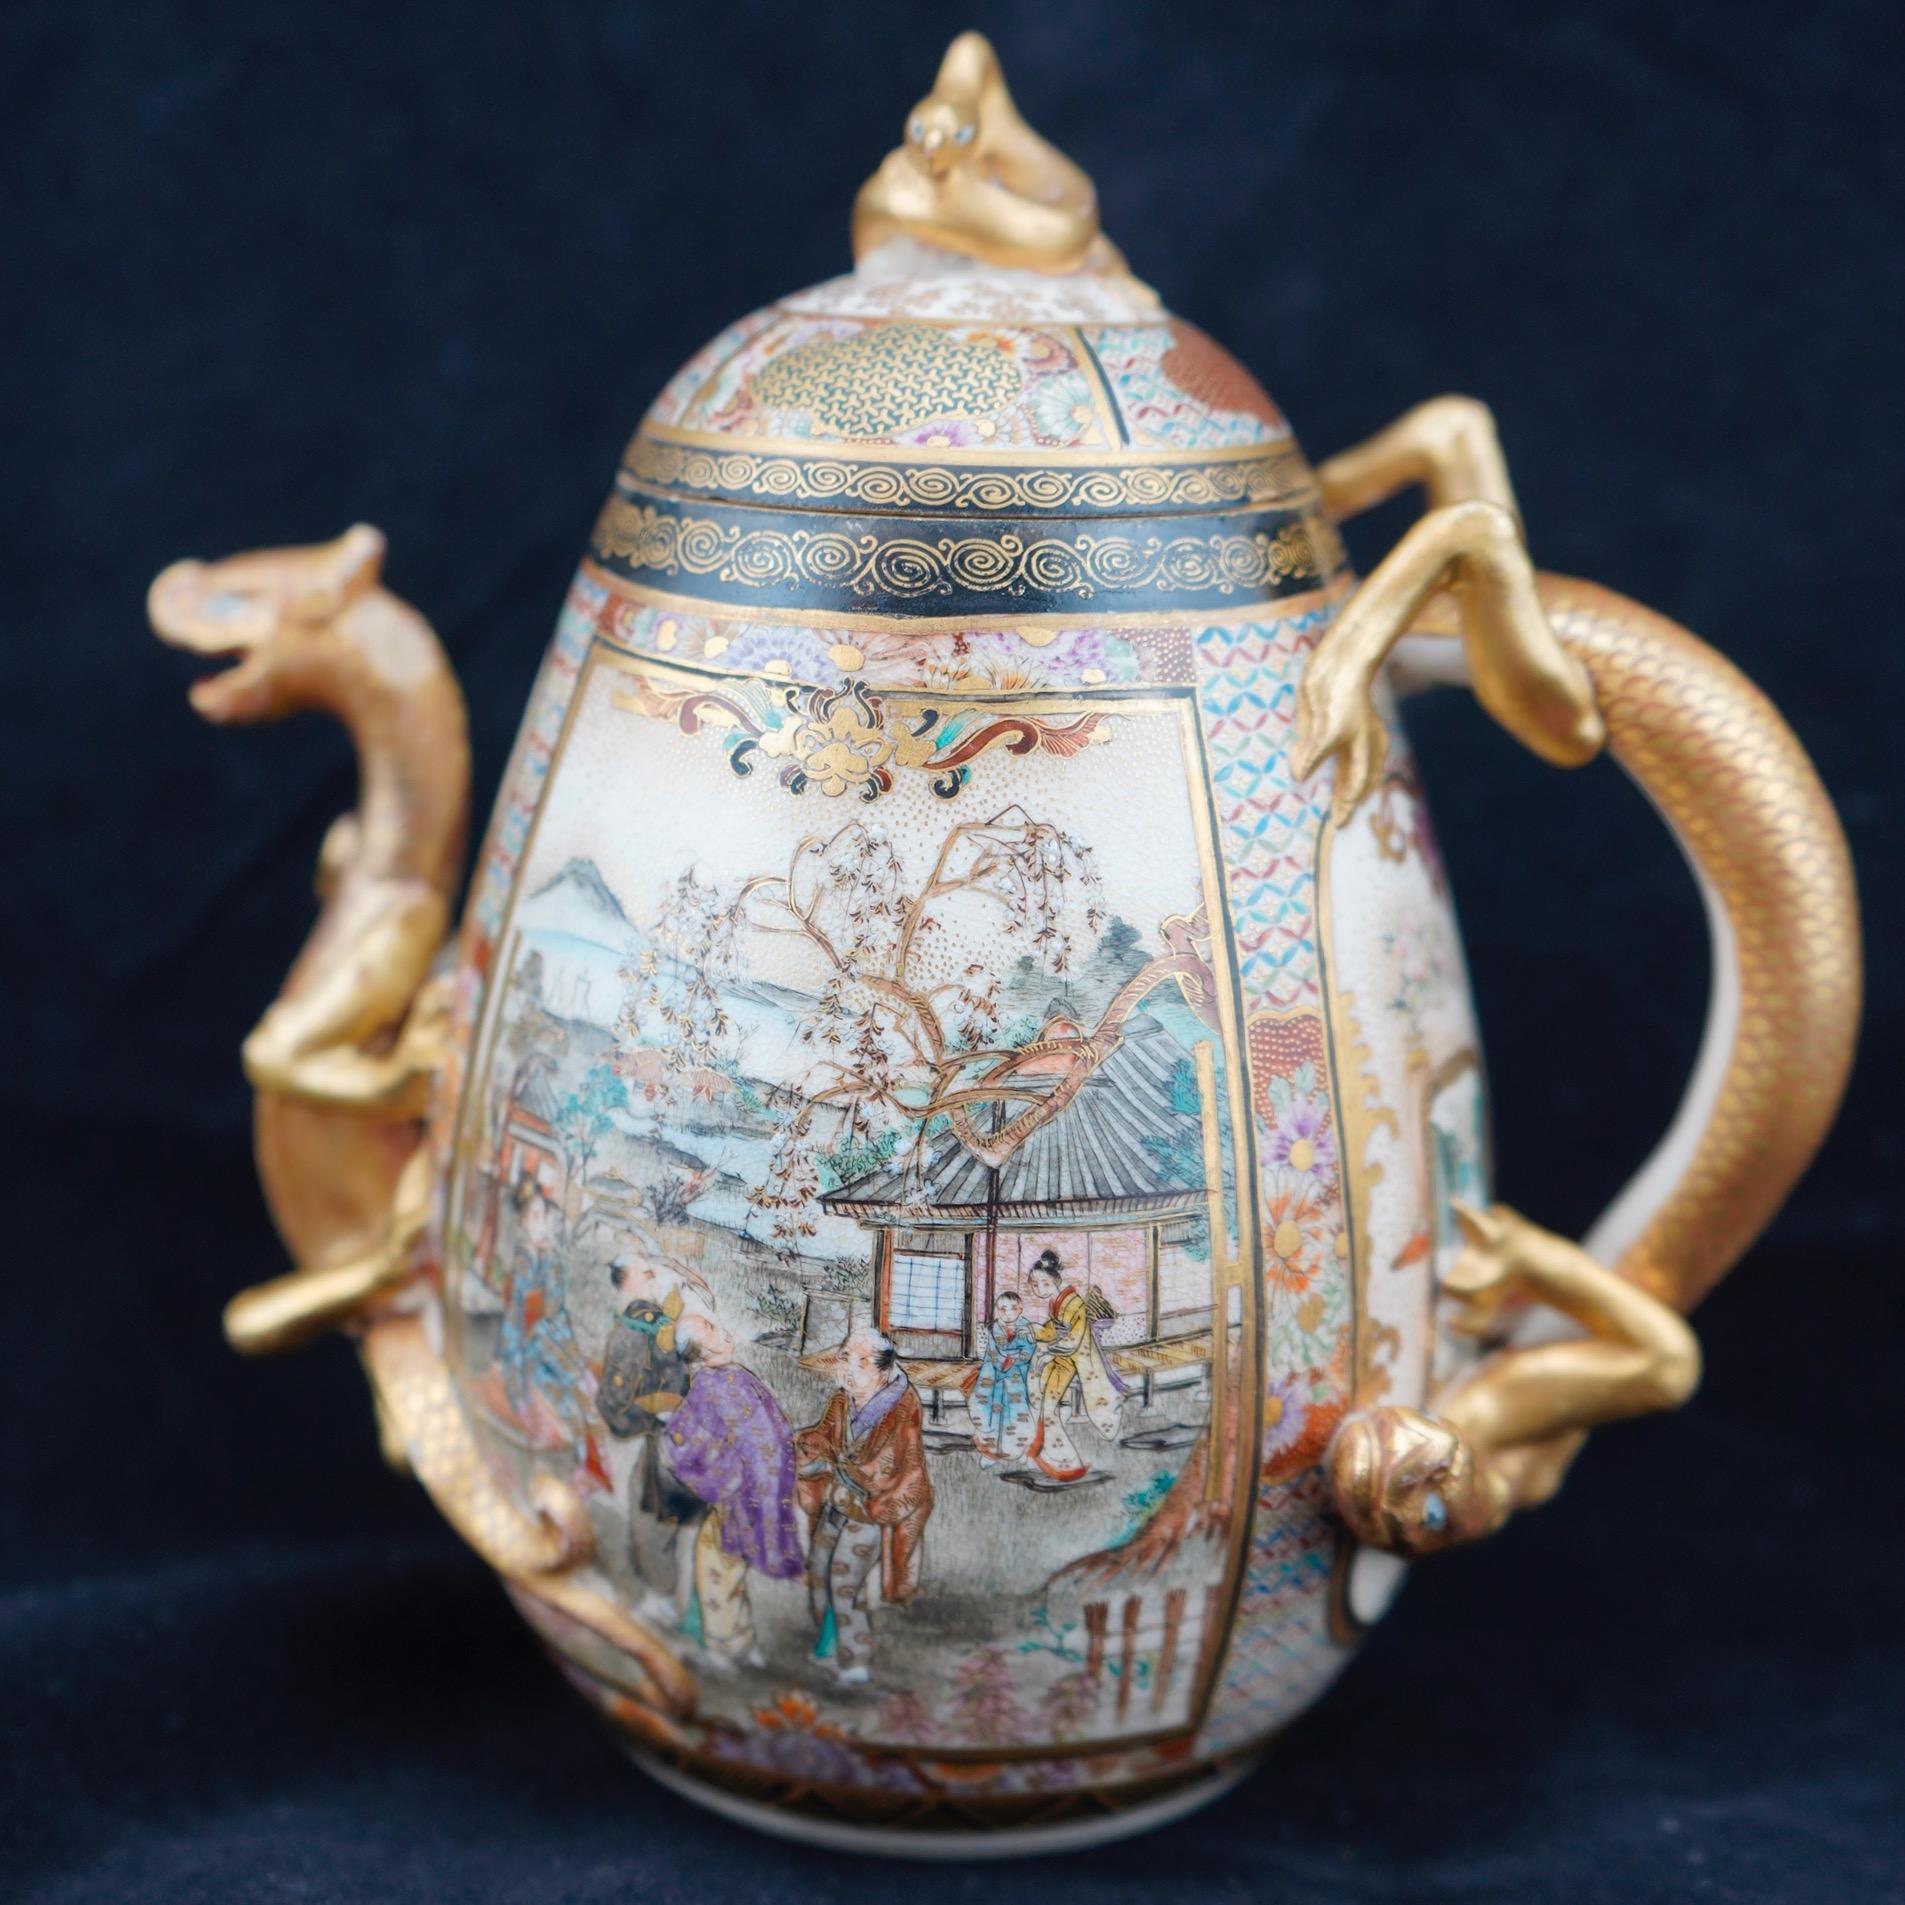 Japanese Meiji satsuma finely decorated and gilded teapot. Some of the finest hand painted work and sculpted shape found on satsuma. Maker's mark on the bottom.